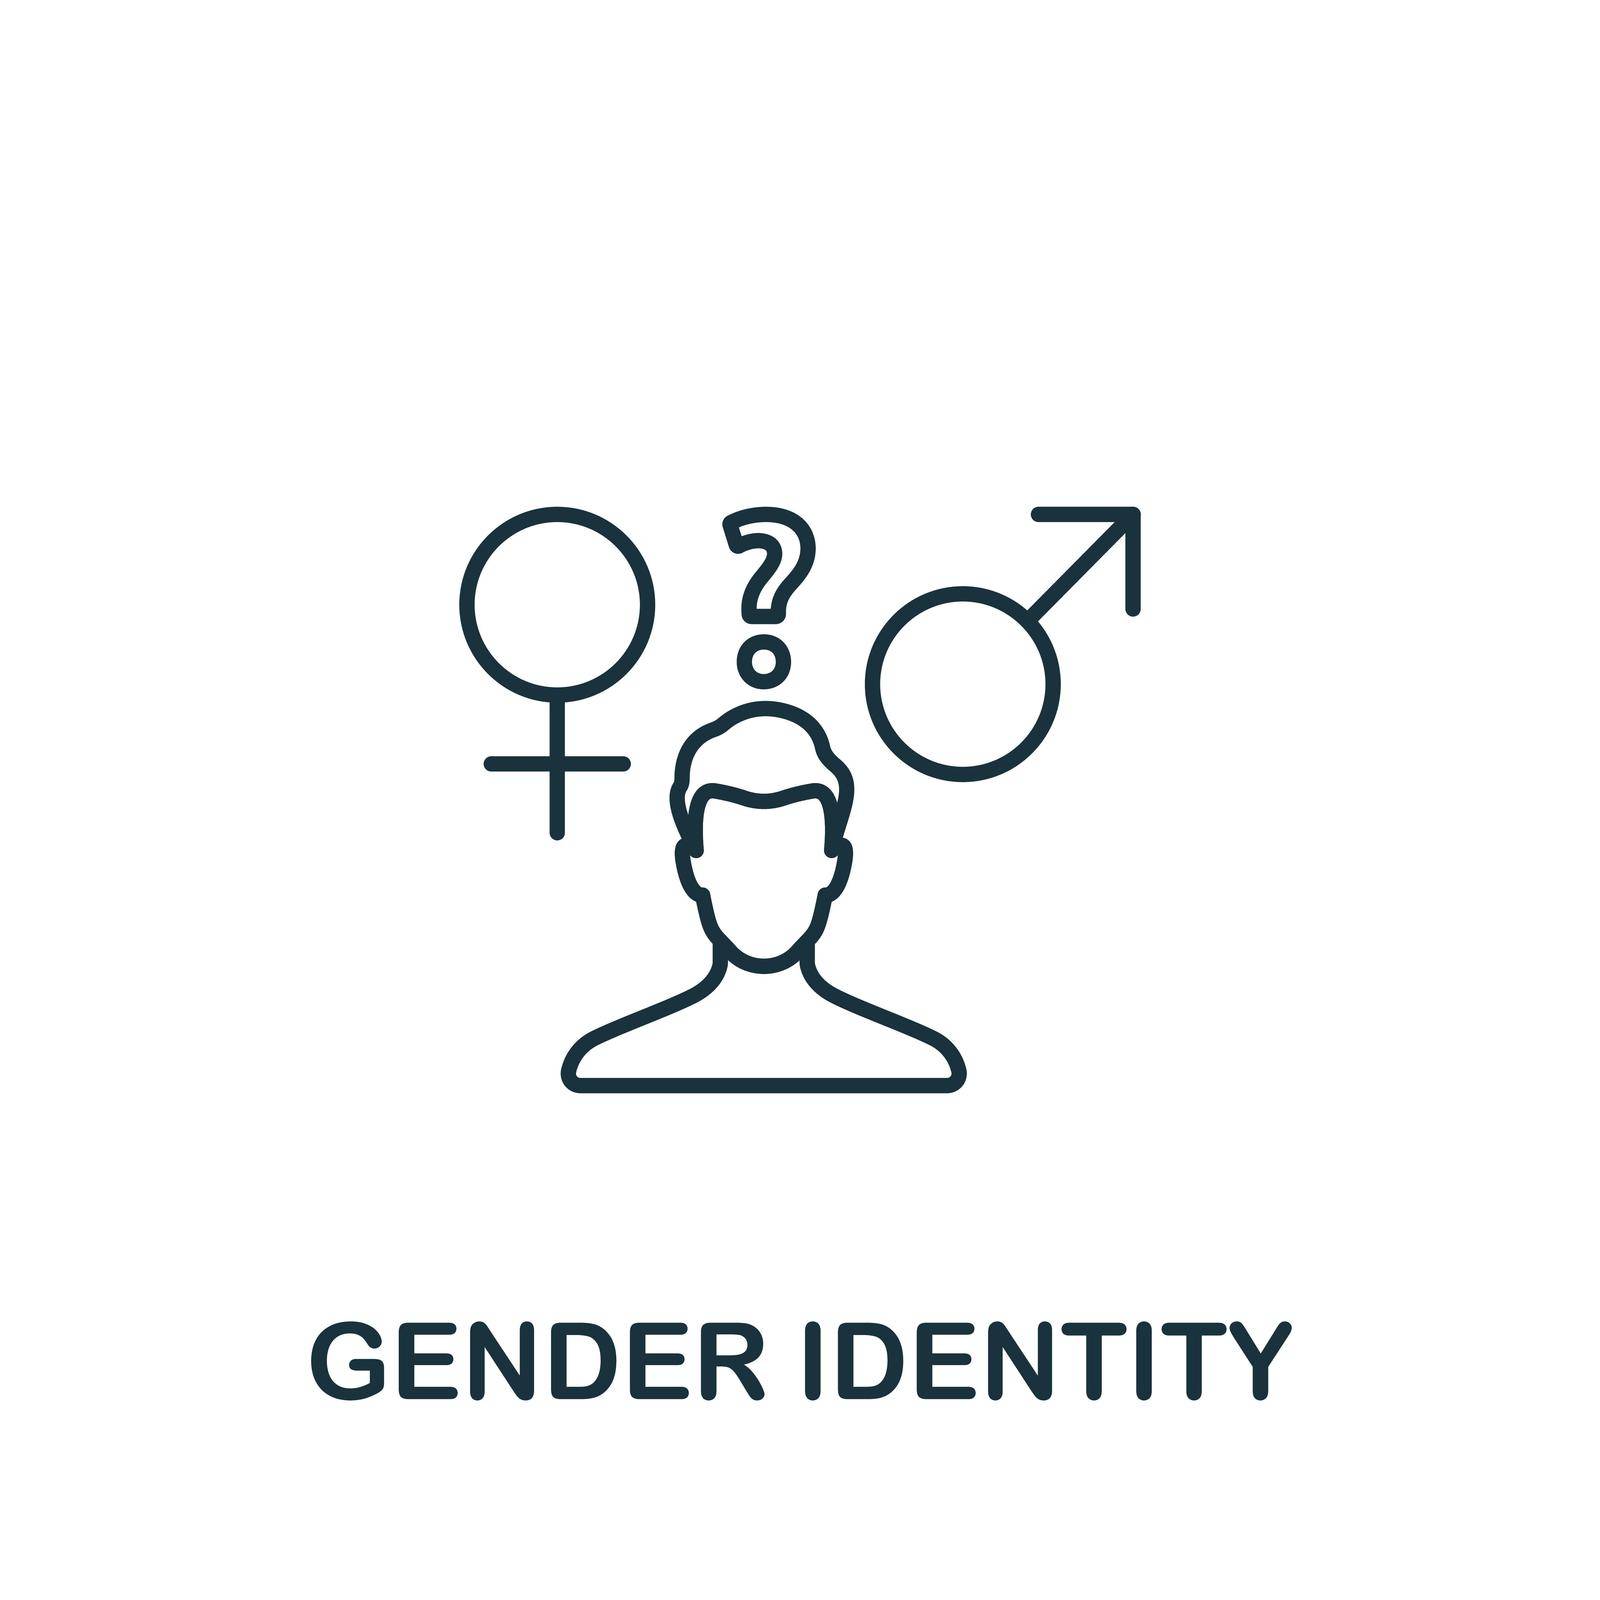 Gender Identity icon. Line simple Lgbt icon for templates, web design and infographics by simakovavector